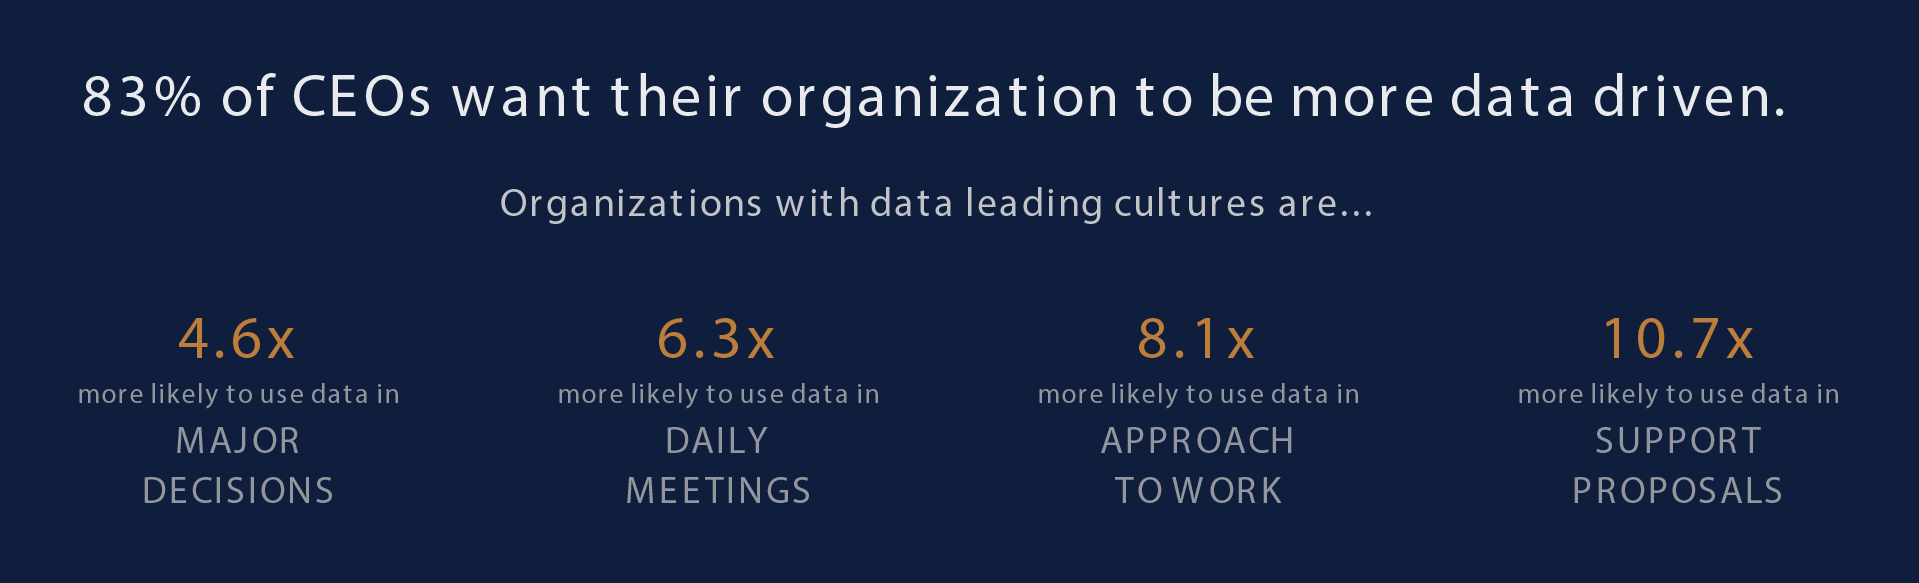 83% of CEOs want their organization to be more data driven